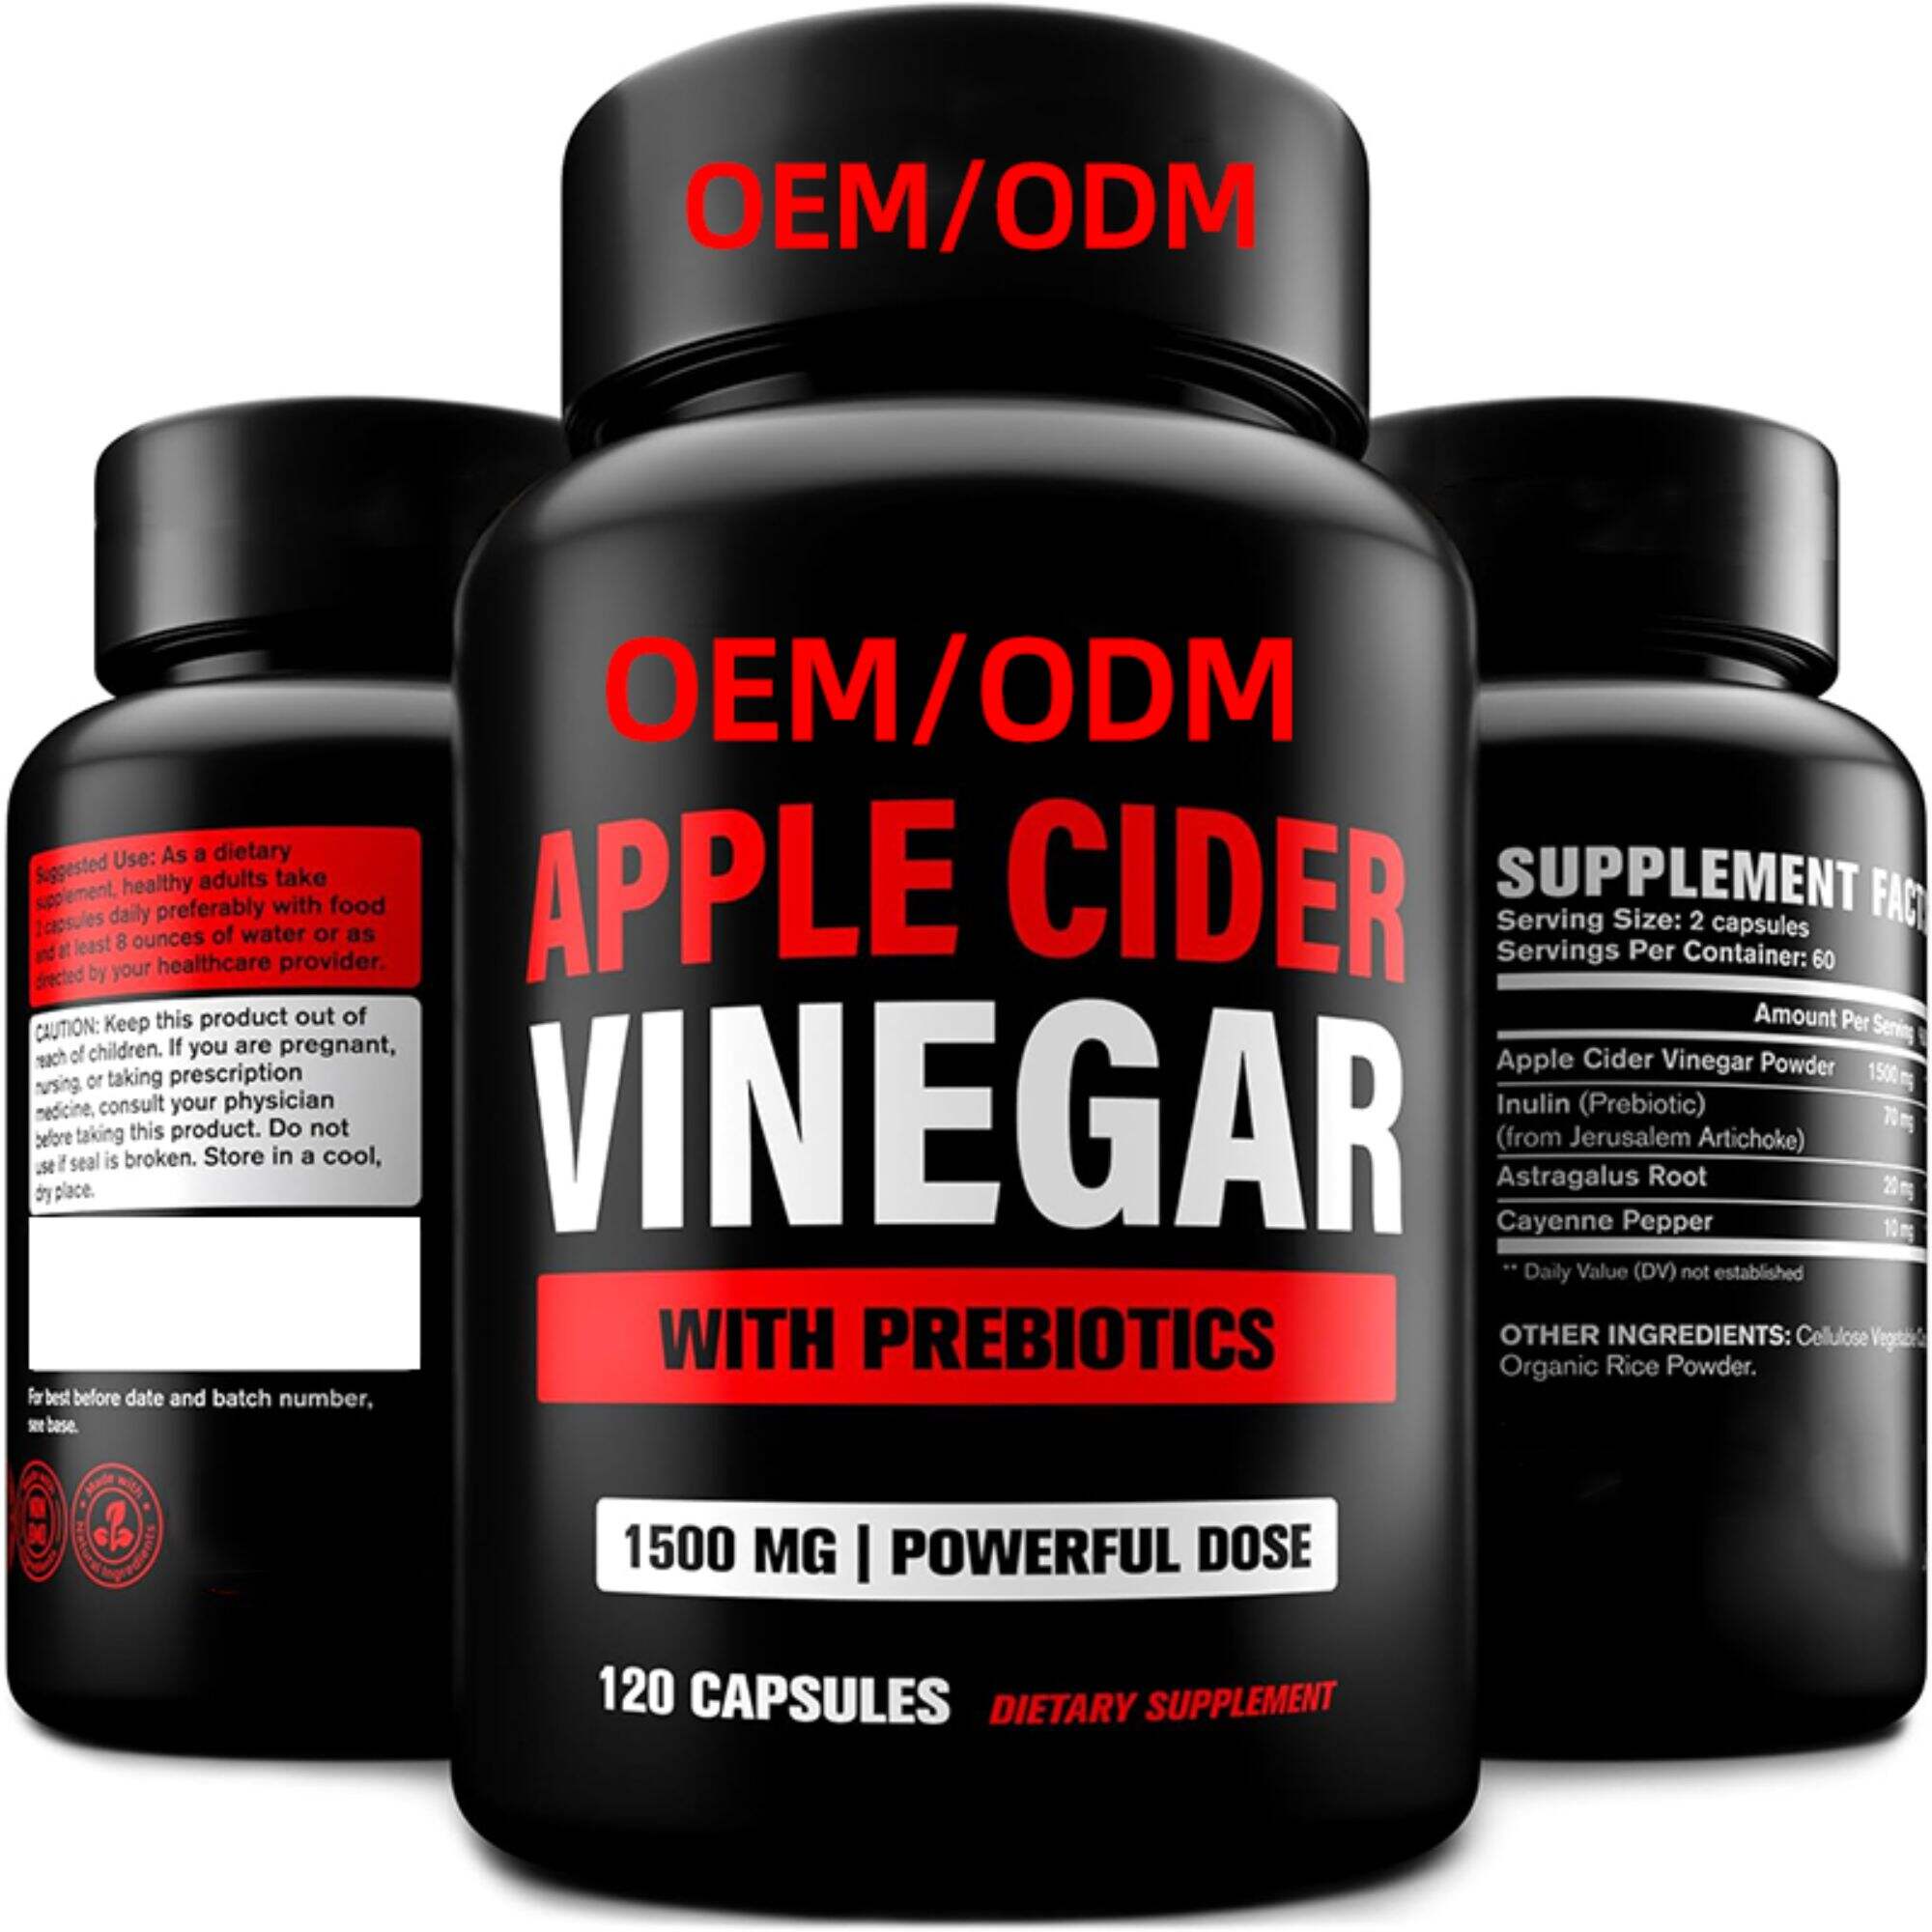 Apple Cider Vinegar Pills with Prebiotic, 2 Month Supply - Apple Cider Vinegar Capsules - Apple Cider Vinegar Supplements, Apple Vinegar Tablets - Energy and Gut Health Support for Women & Men 1500 mg